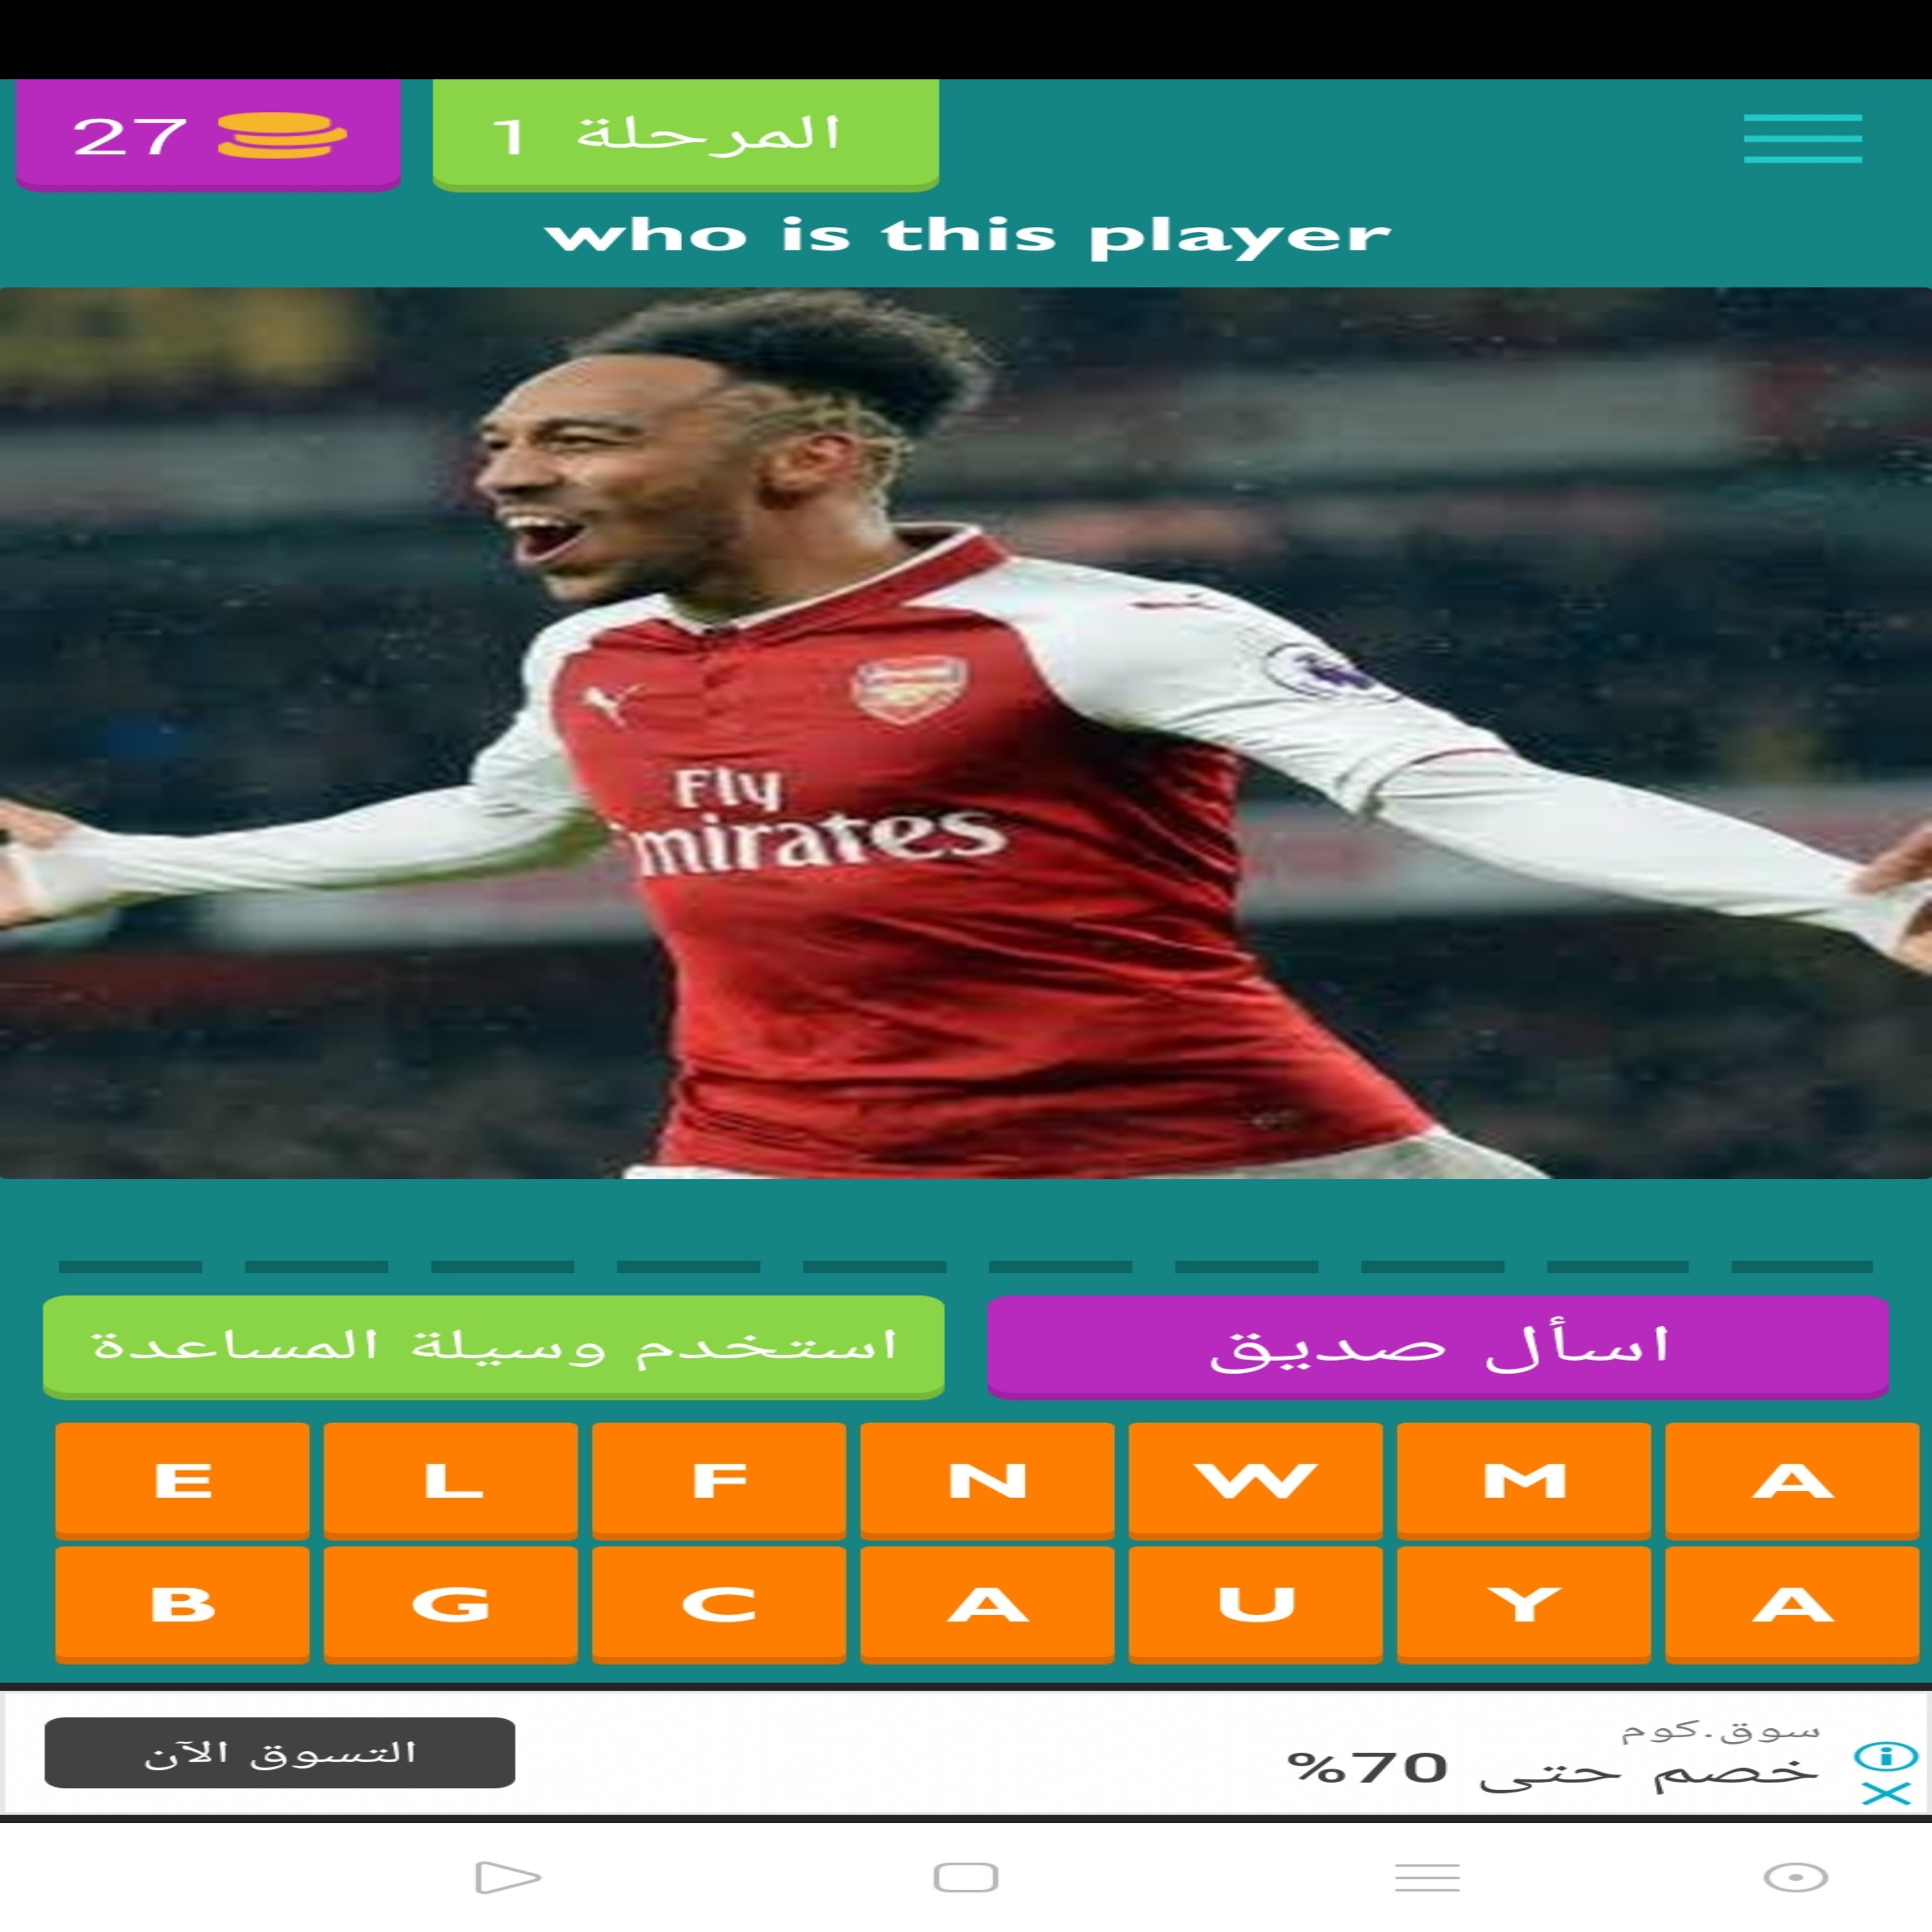 Guess the football player premier league for Android - APK Download